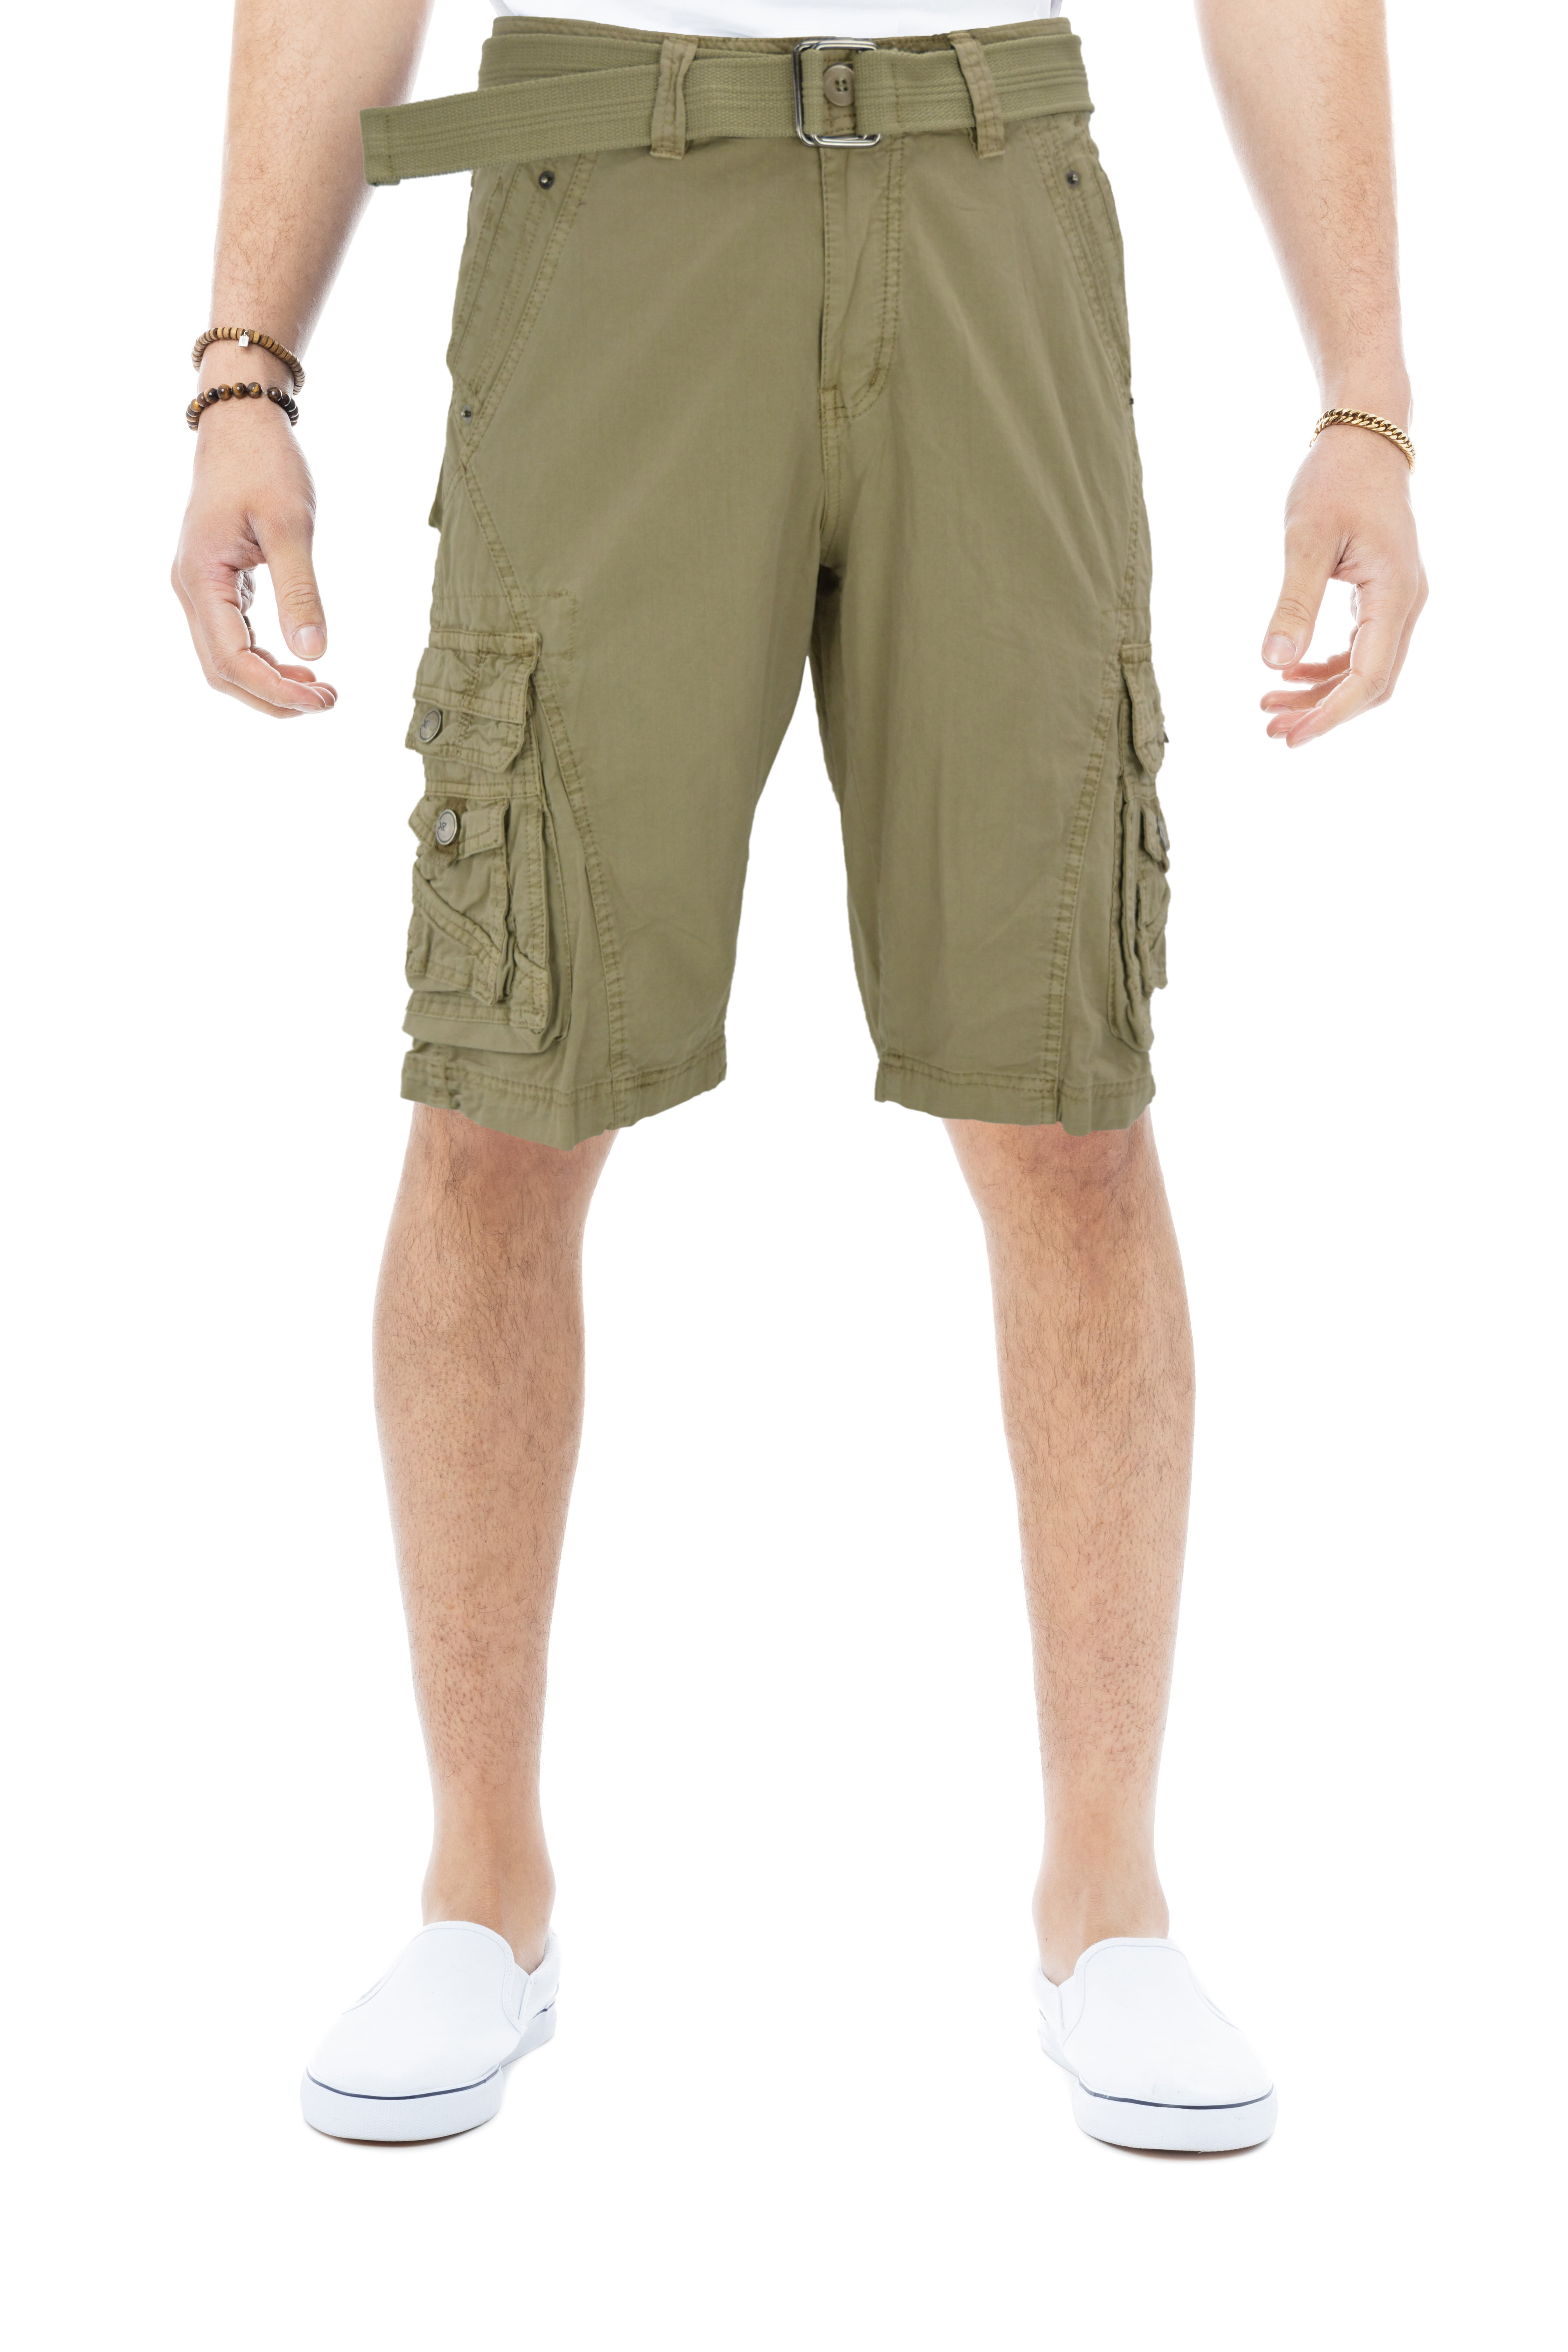 X RAY Mens Tactical Bermuda Cargo Shorts Camo and Solid Colors 12.5 Inseam Knee Length Classic Fit Multi Pocket